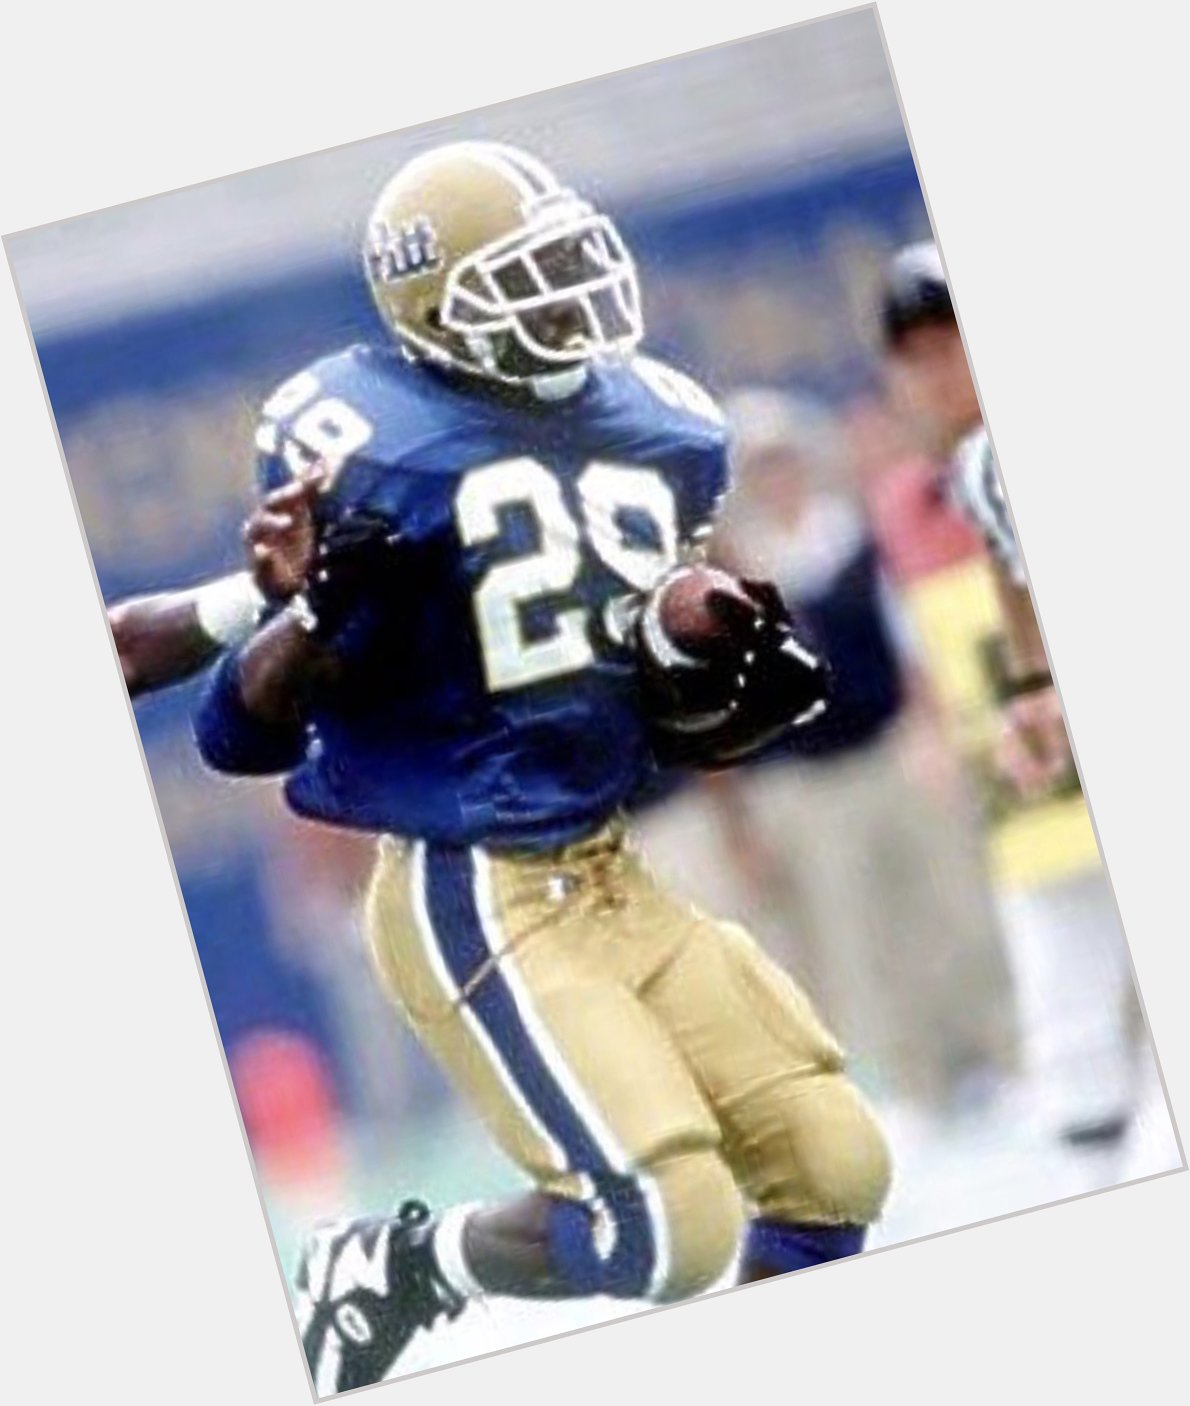 Happy Birthday to former great and Pro Football HOF RB Curtis Martin 